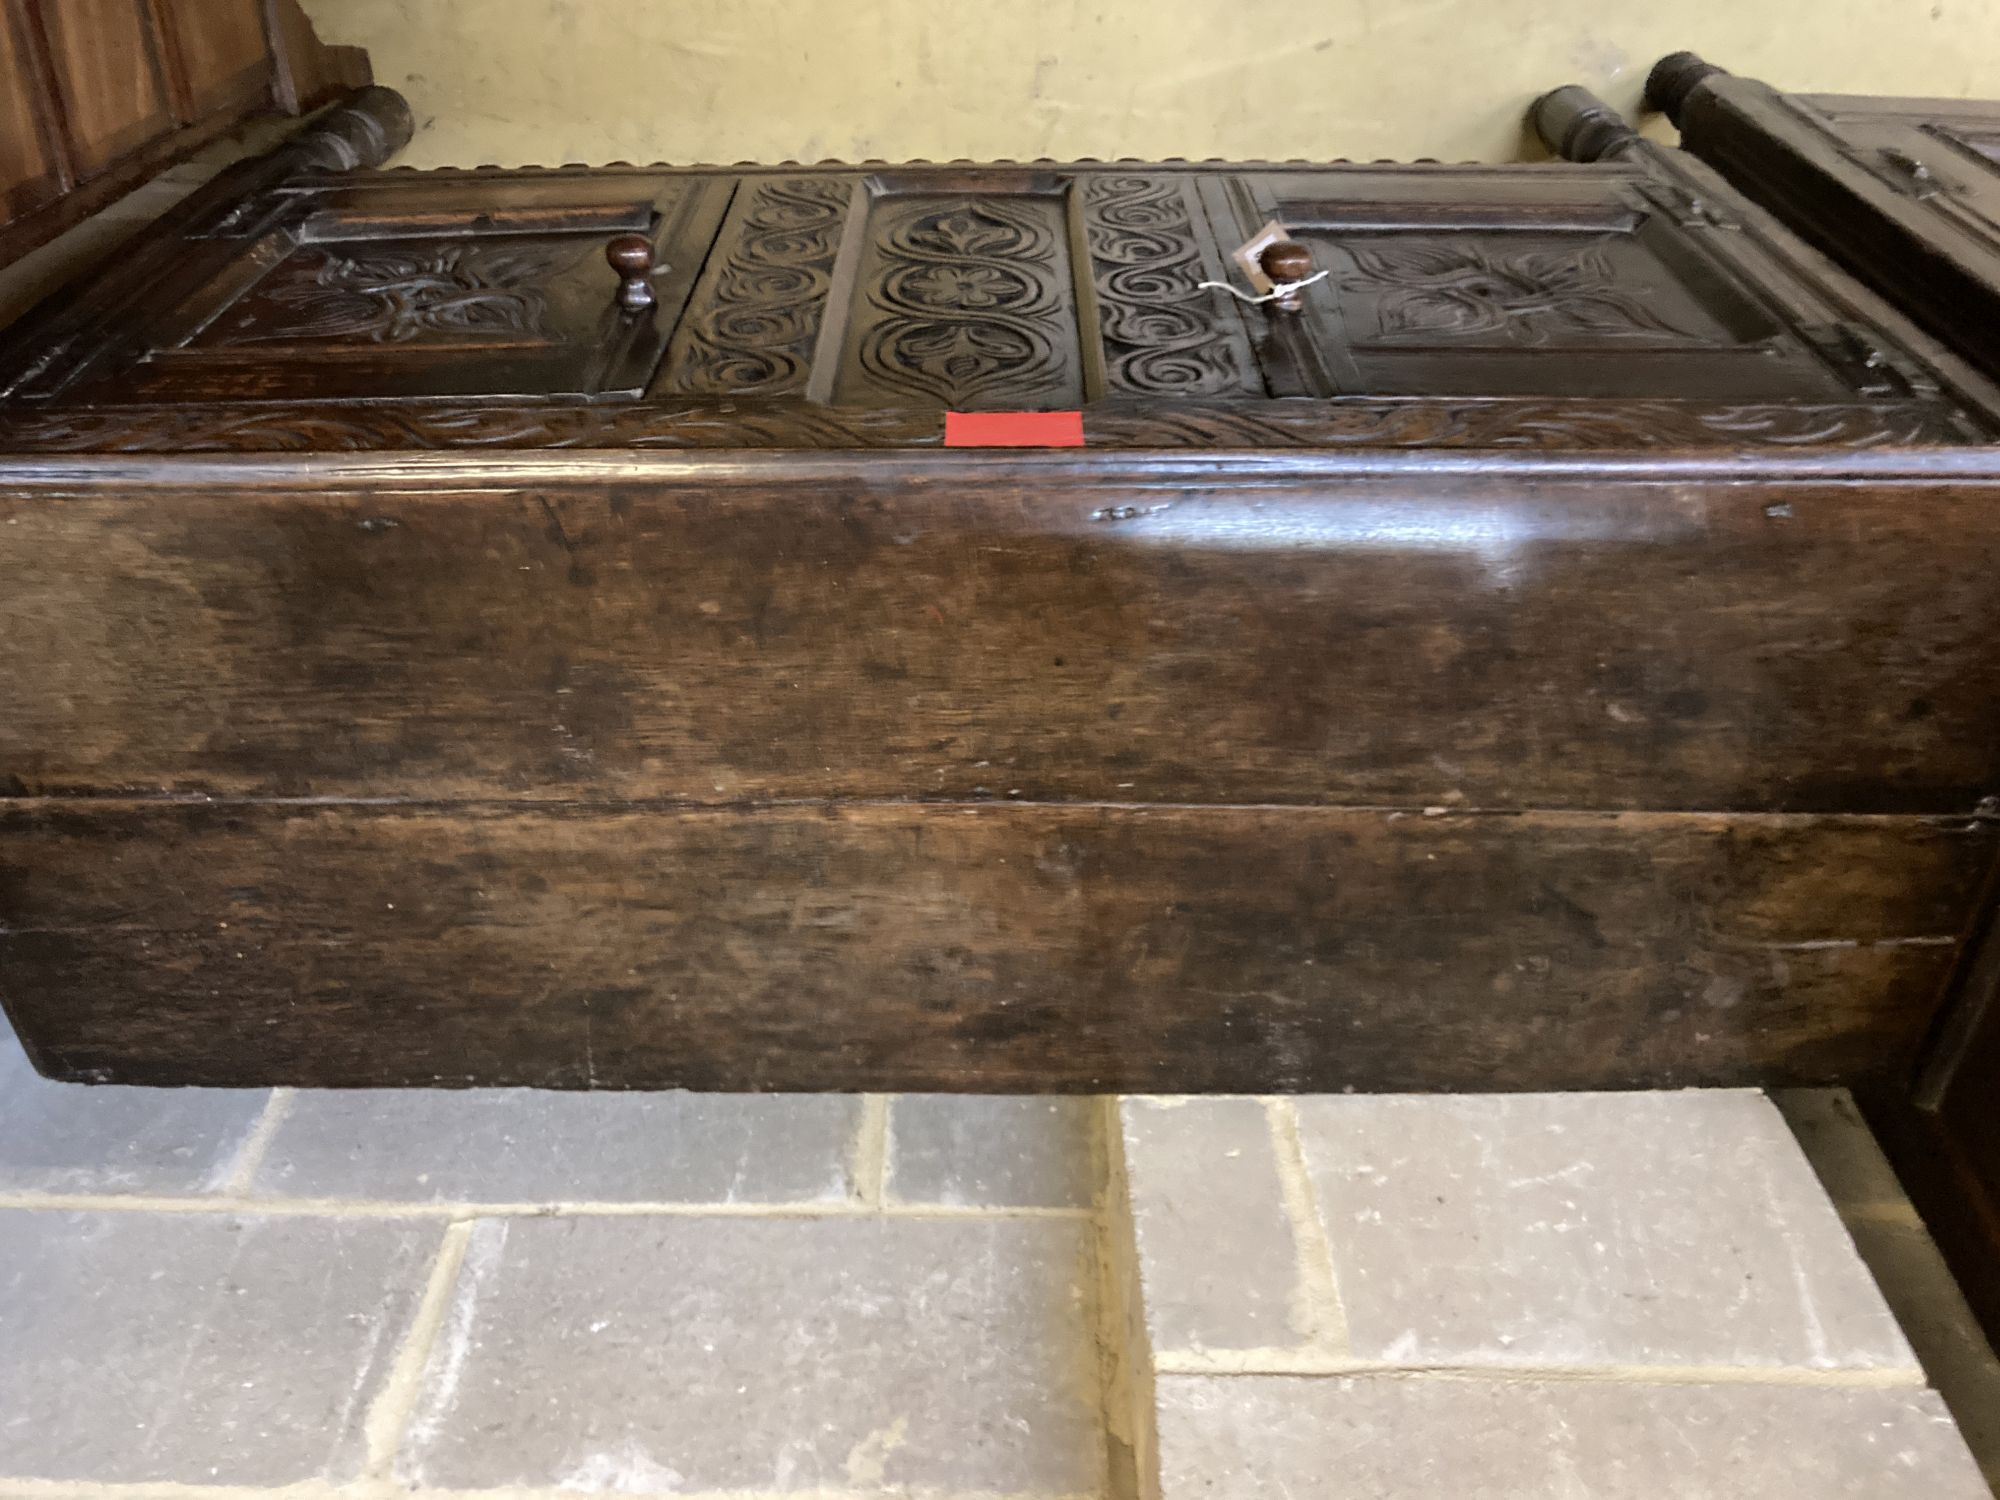 A 17th century and later oak two door cabinet, width 126cm, depth 46cm, height 94cm